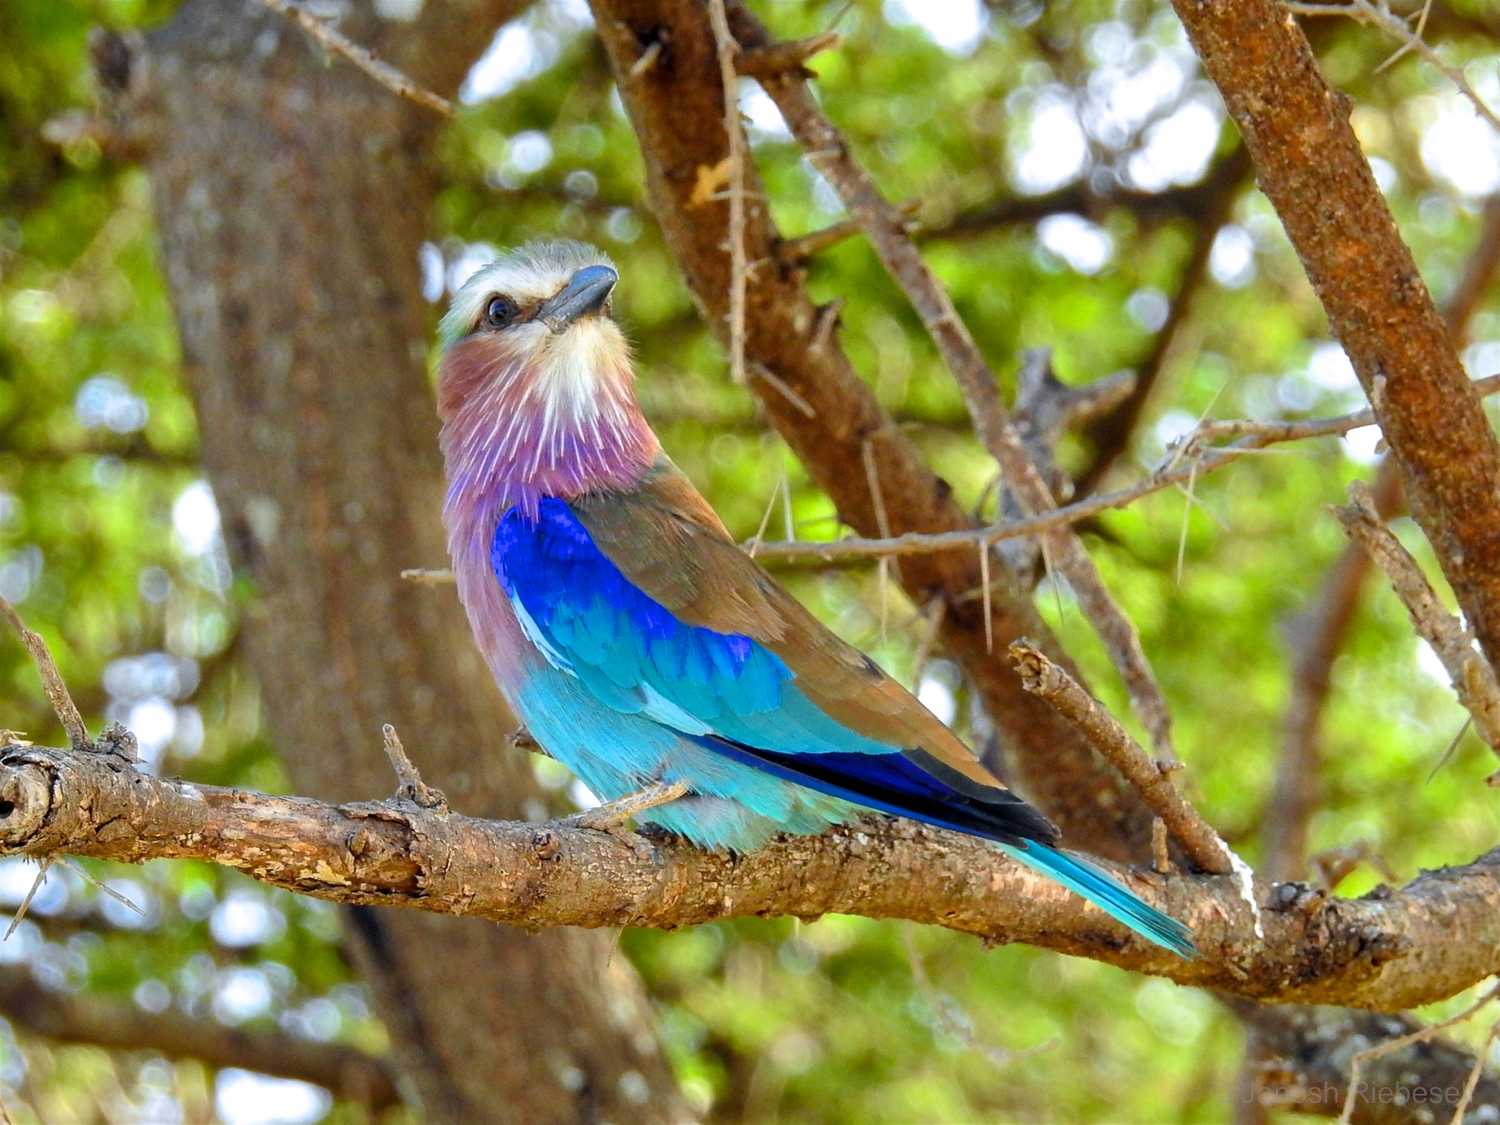 Tanzania Lilac Breasted Roller